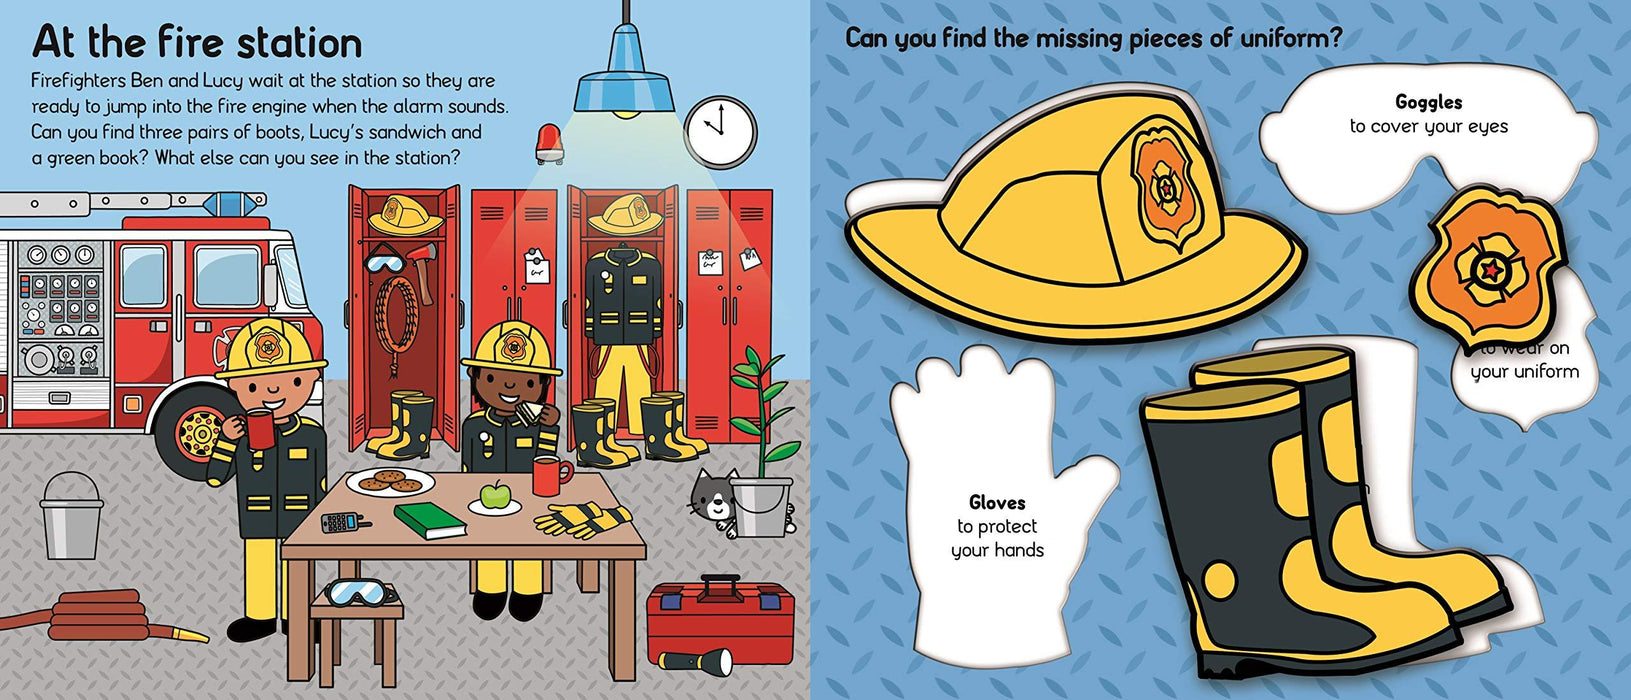 Firefighter Lets Pretend by Priddy Books - Ages 0-5 - Board Book 0-5 Priddy Books